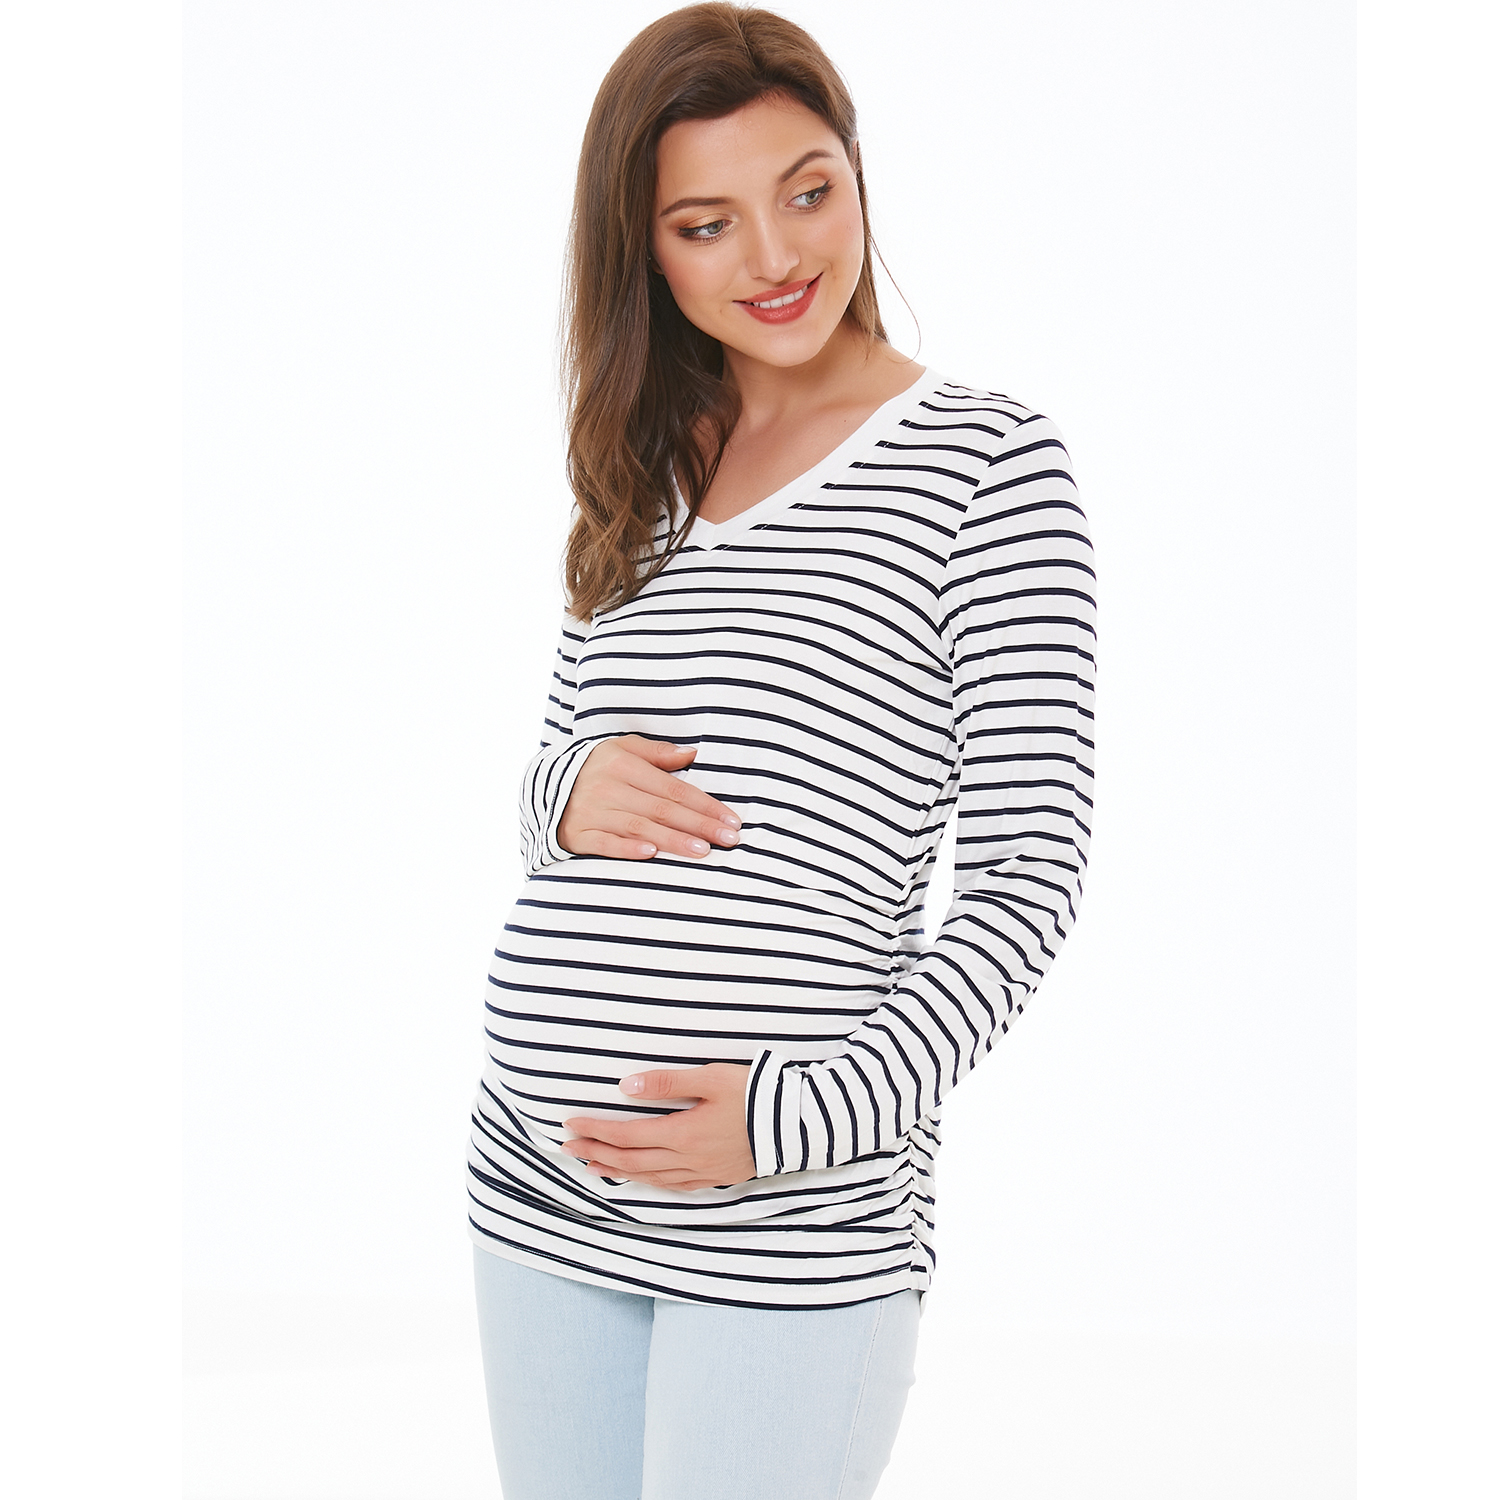 Smallshow Womens Maternity Shirts Long Sleeve Pregnancy Clothes Tops 3-Pack 